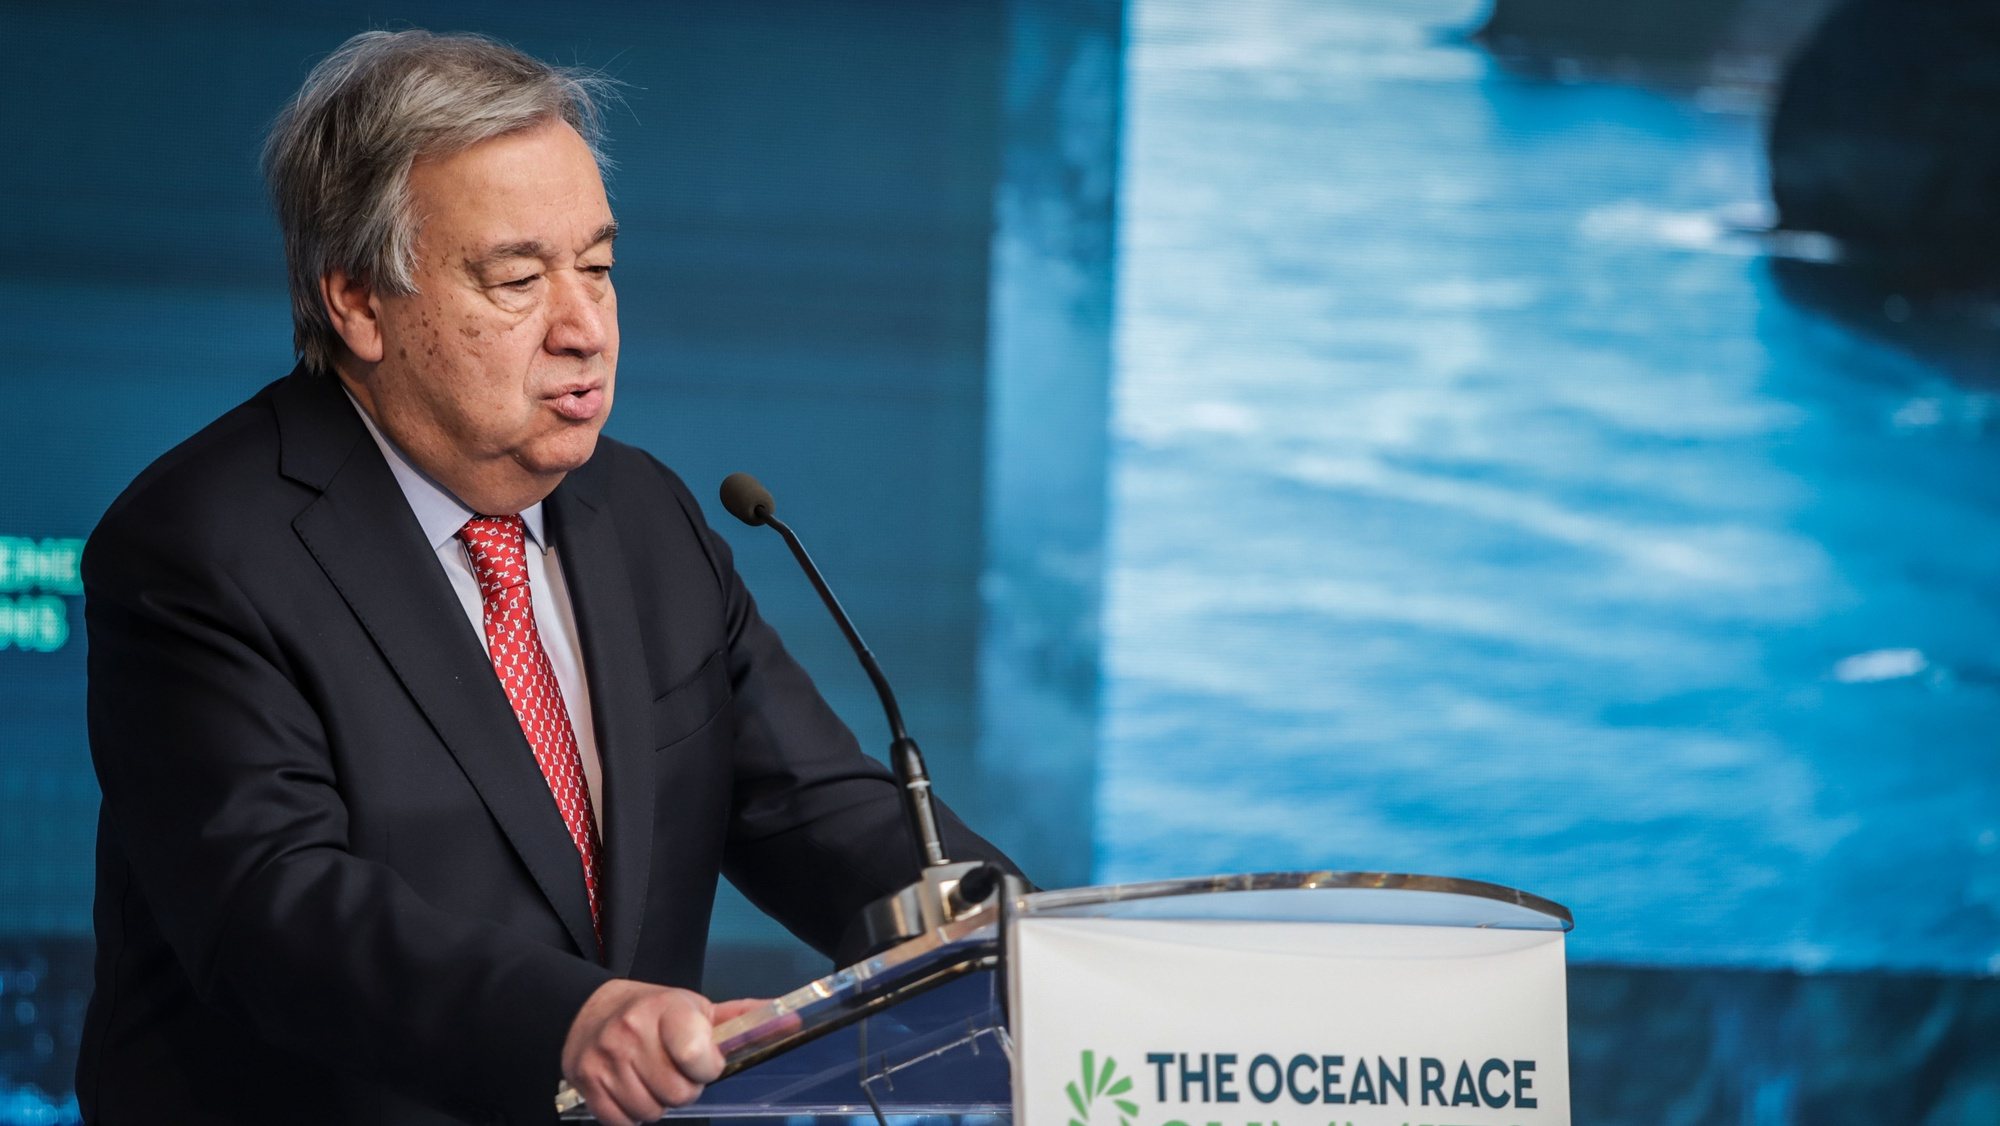 Secretary-General of the United Nations Antonio Guterres address The Ocean Race Summit in Mindelo, Sao Vicente island, Cape Verde, 23 January 2023. The Ocean Race Summit Mindelo is part of a series of events that bring together the unique perspectives of sailors who have ocean experiences. They are the key drivers for new measures and commitments to address and combat the serious problems at sea. ELTON MONTEIRO/LUSA